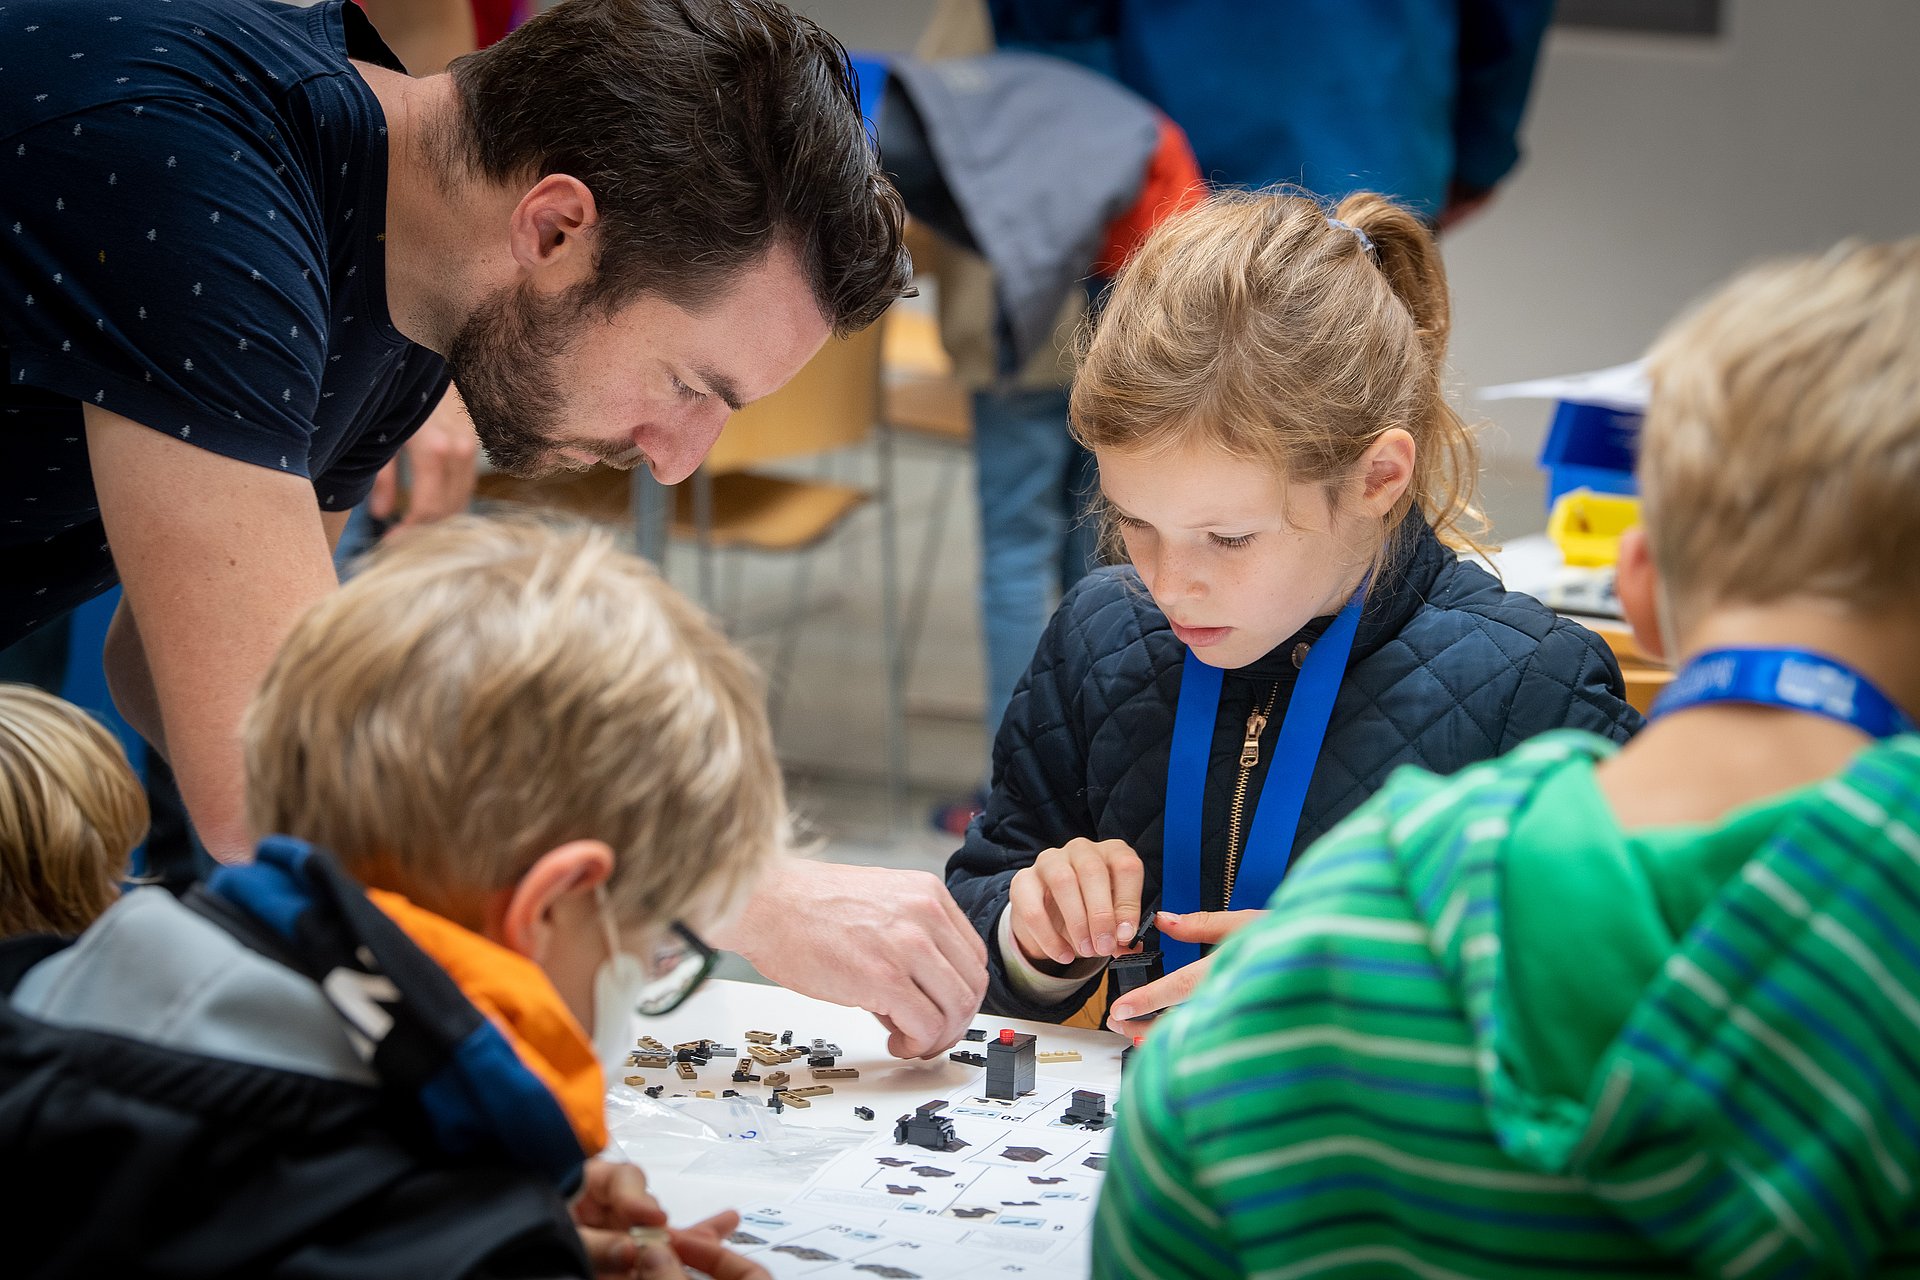 A man builds a Lego model at a table with other children.